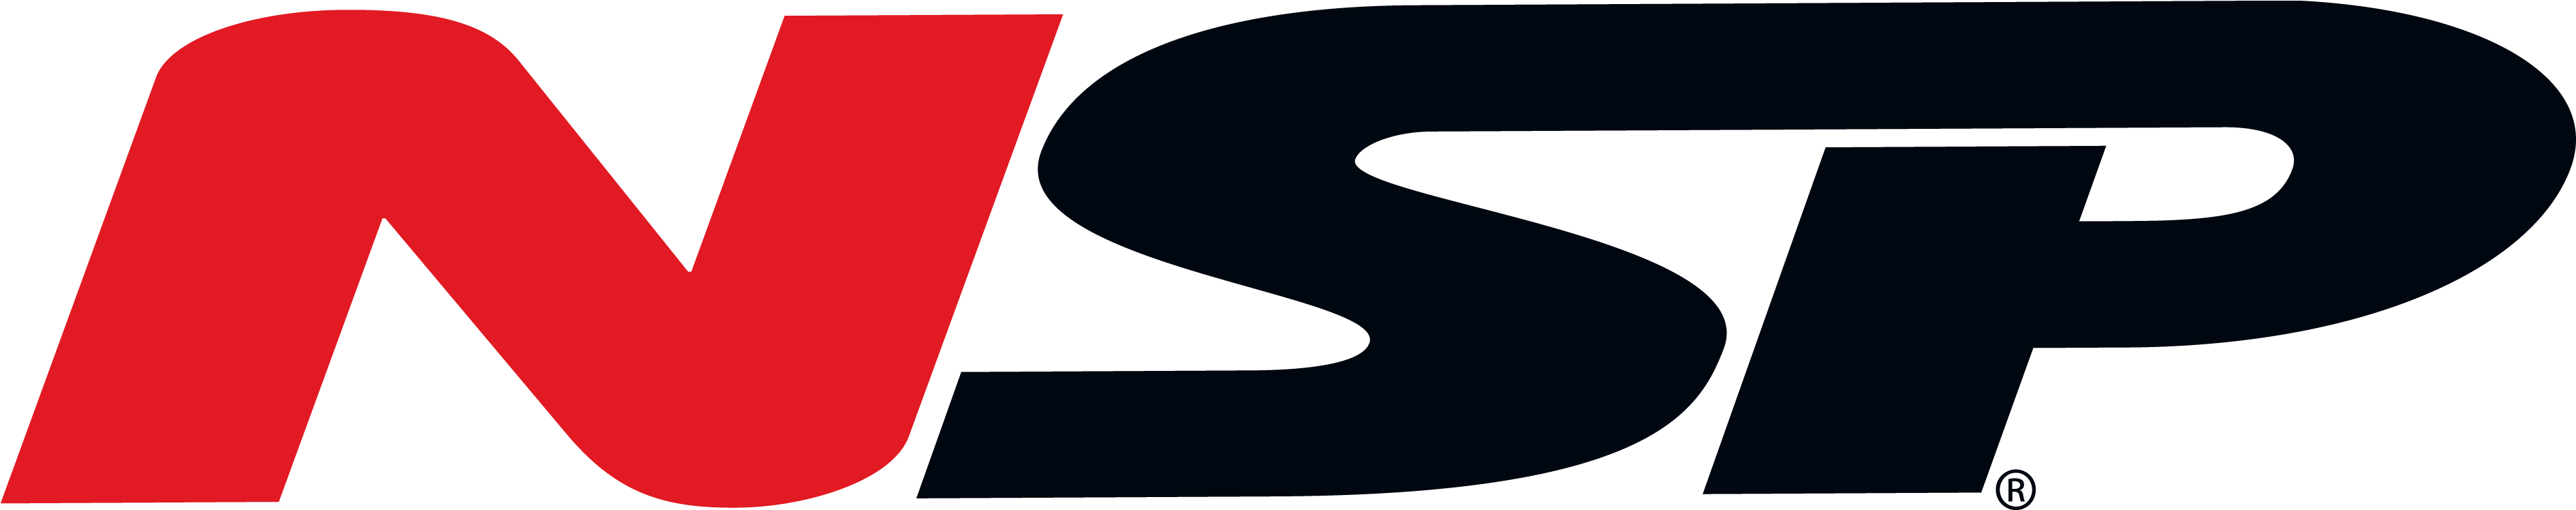 New Surf Project Since - Nsp Surfboards Logo (3820x747)